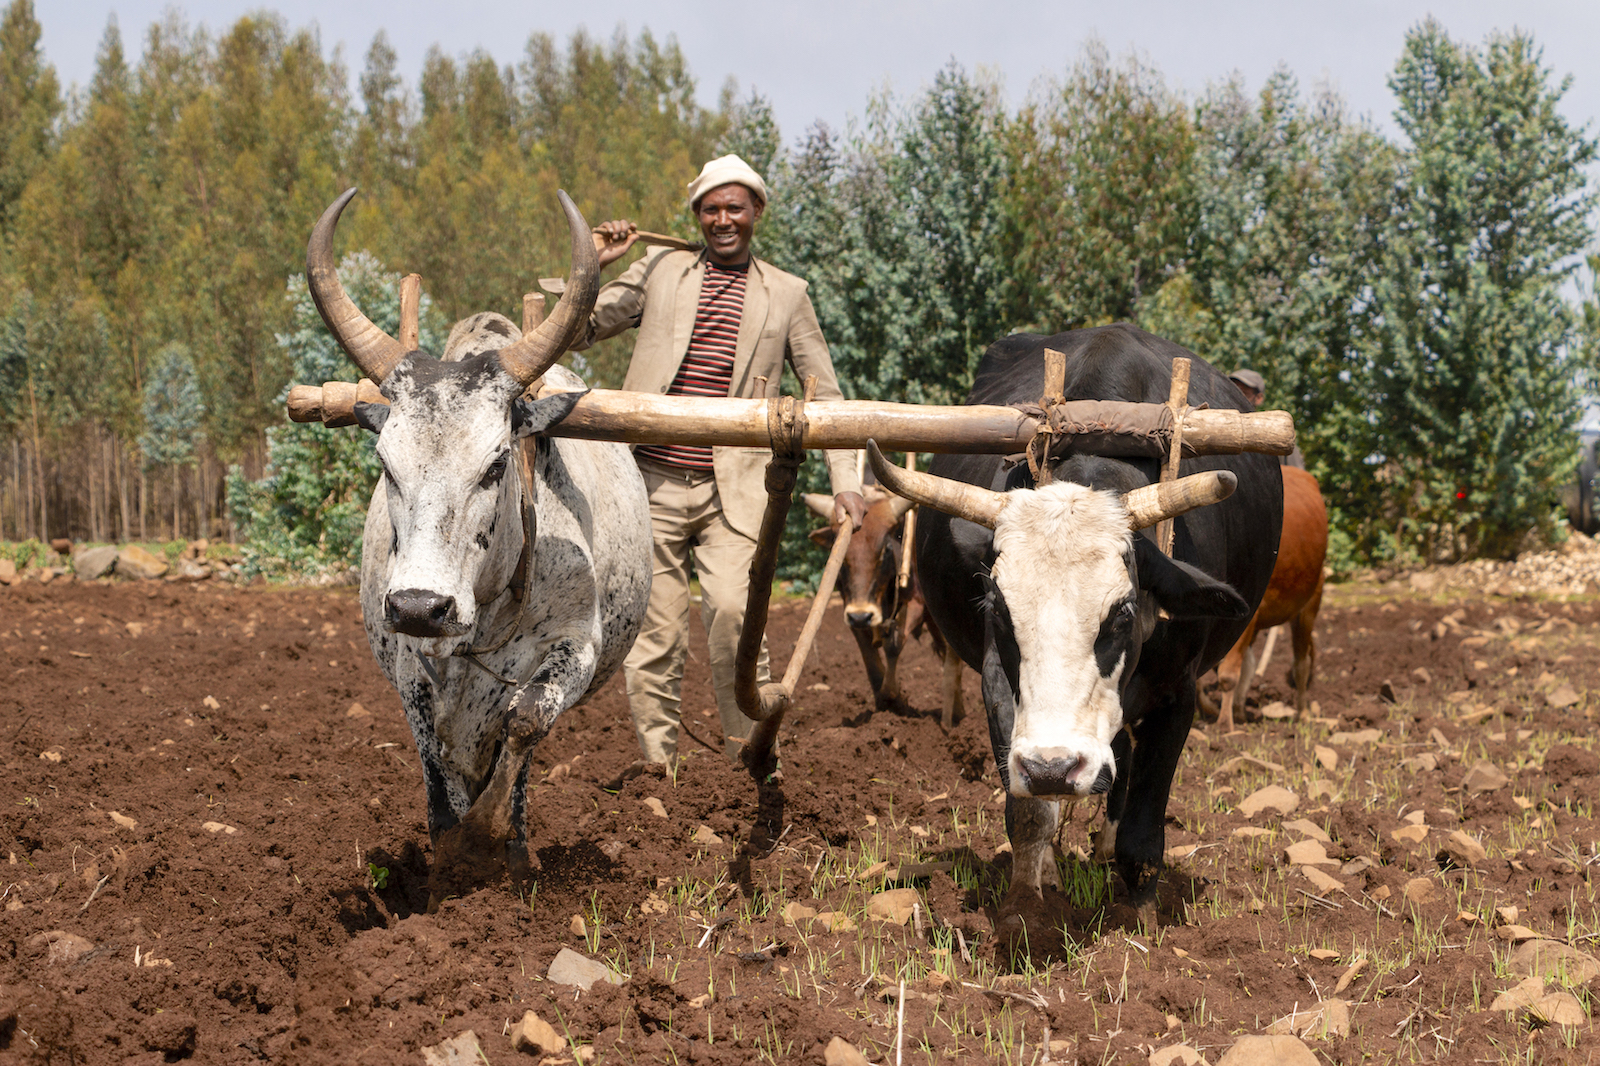 Mechanization could boost Ethiopian wheat production and provide youth with new job opportunities. (Photo: Gerardo Mejía/CIMMYT)